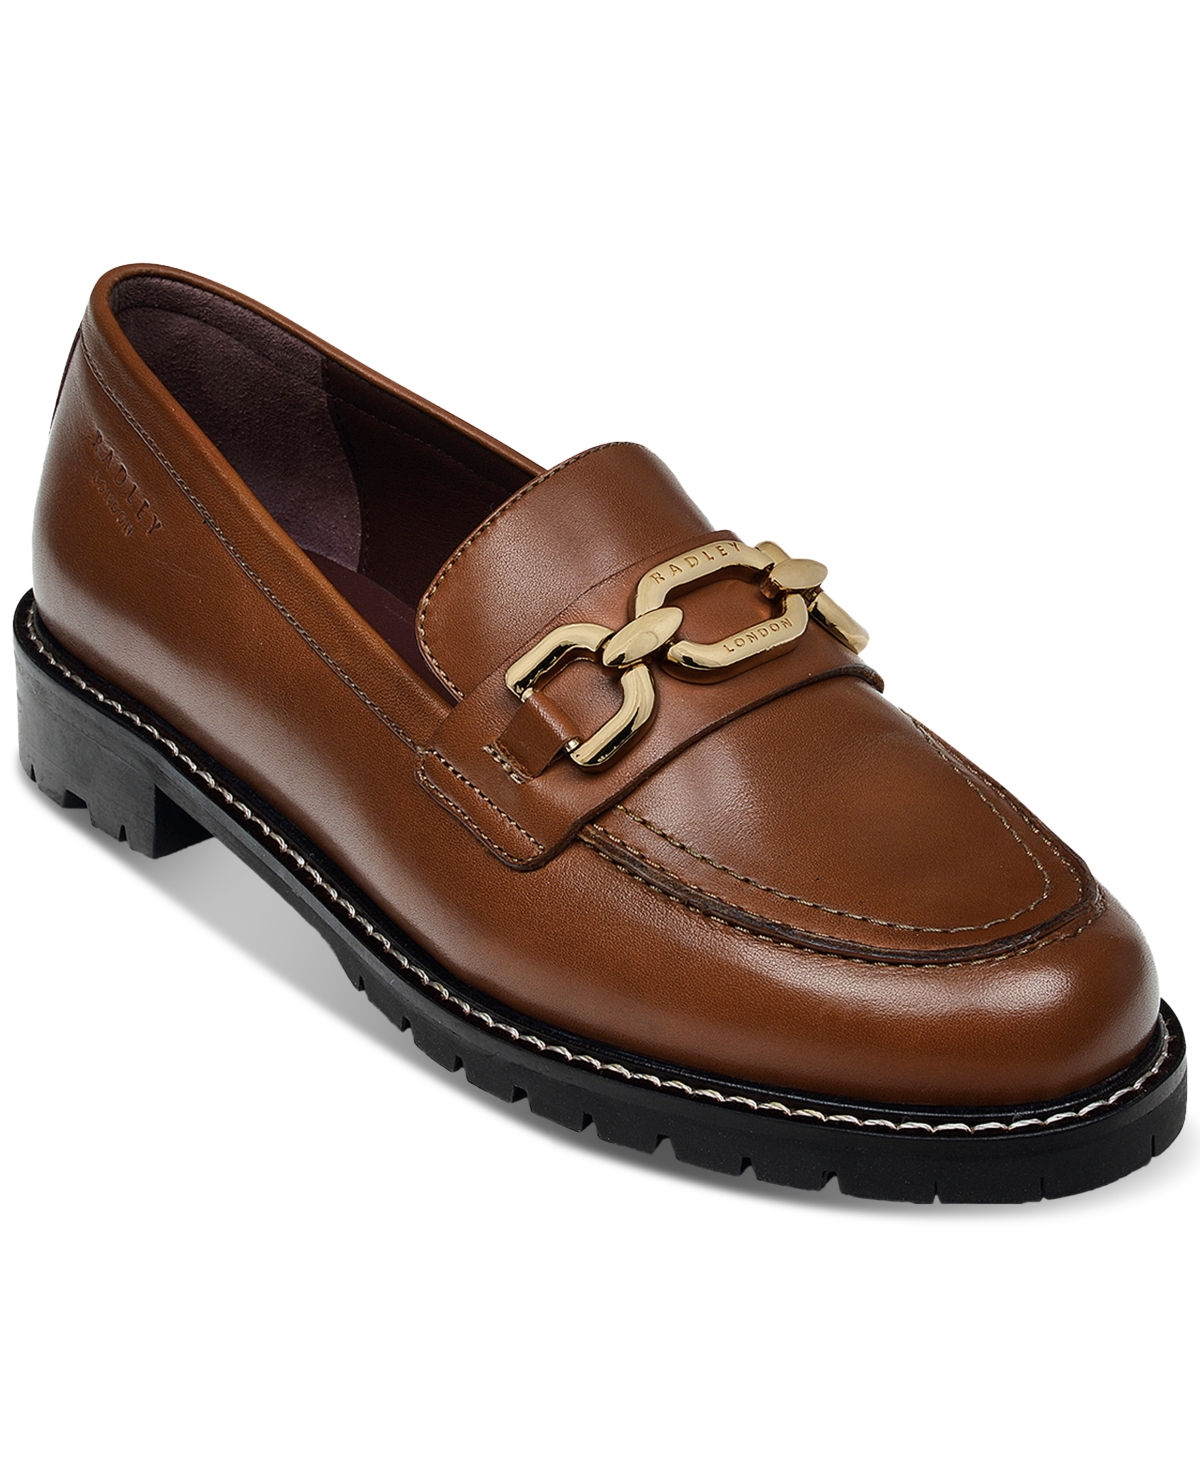 Women's Cavendish Avenue Chunky Chain Loafers - Tan